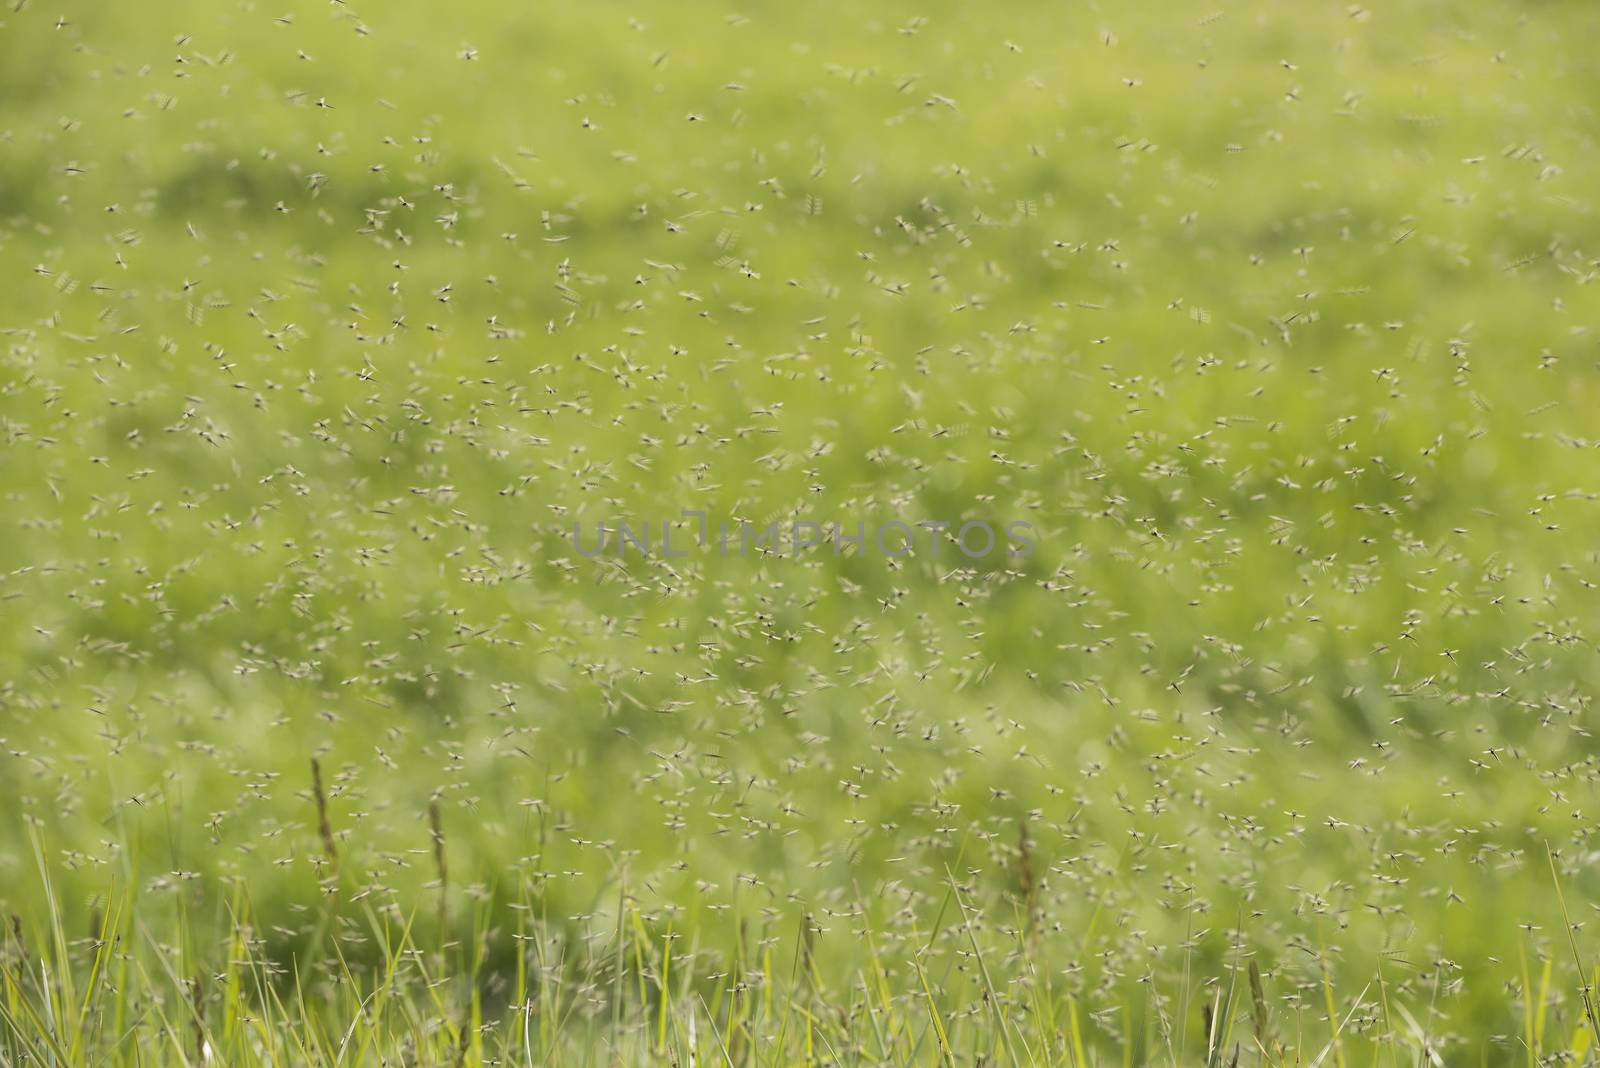 Swarms of mosquitoes over a grass field
 by Tofotografie